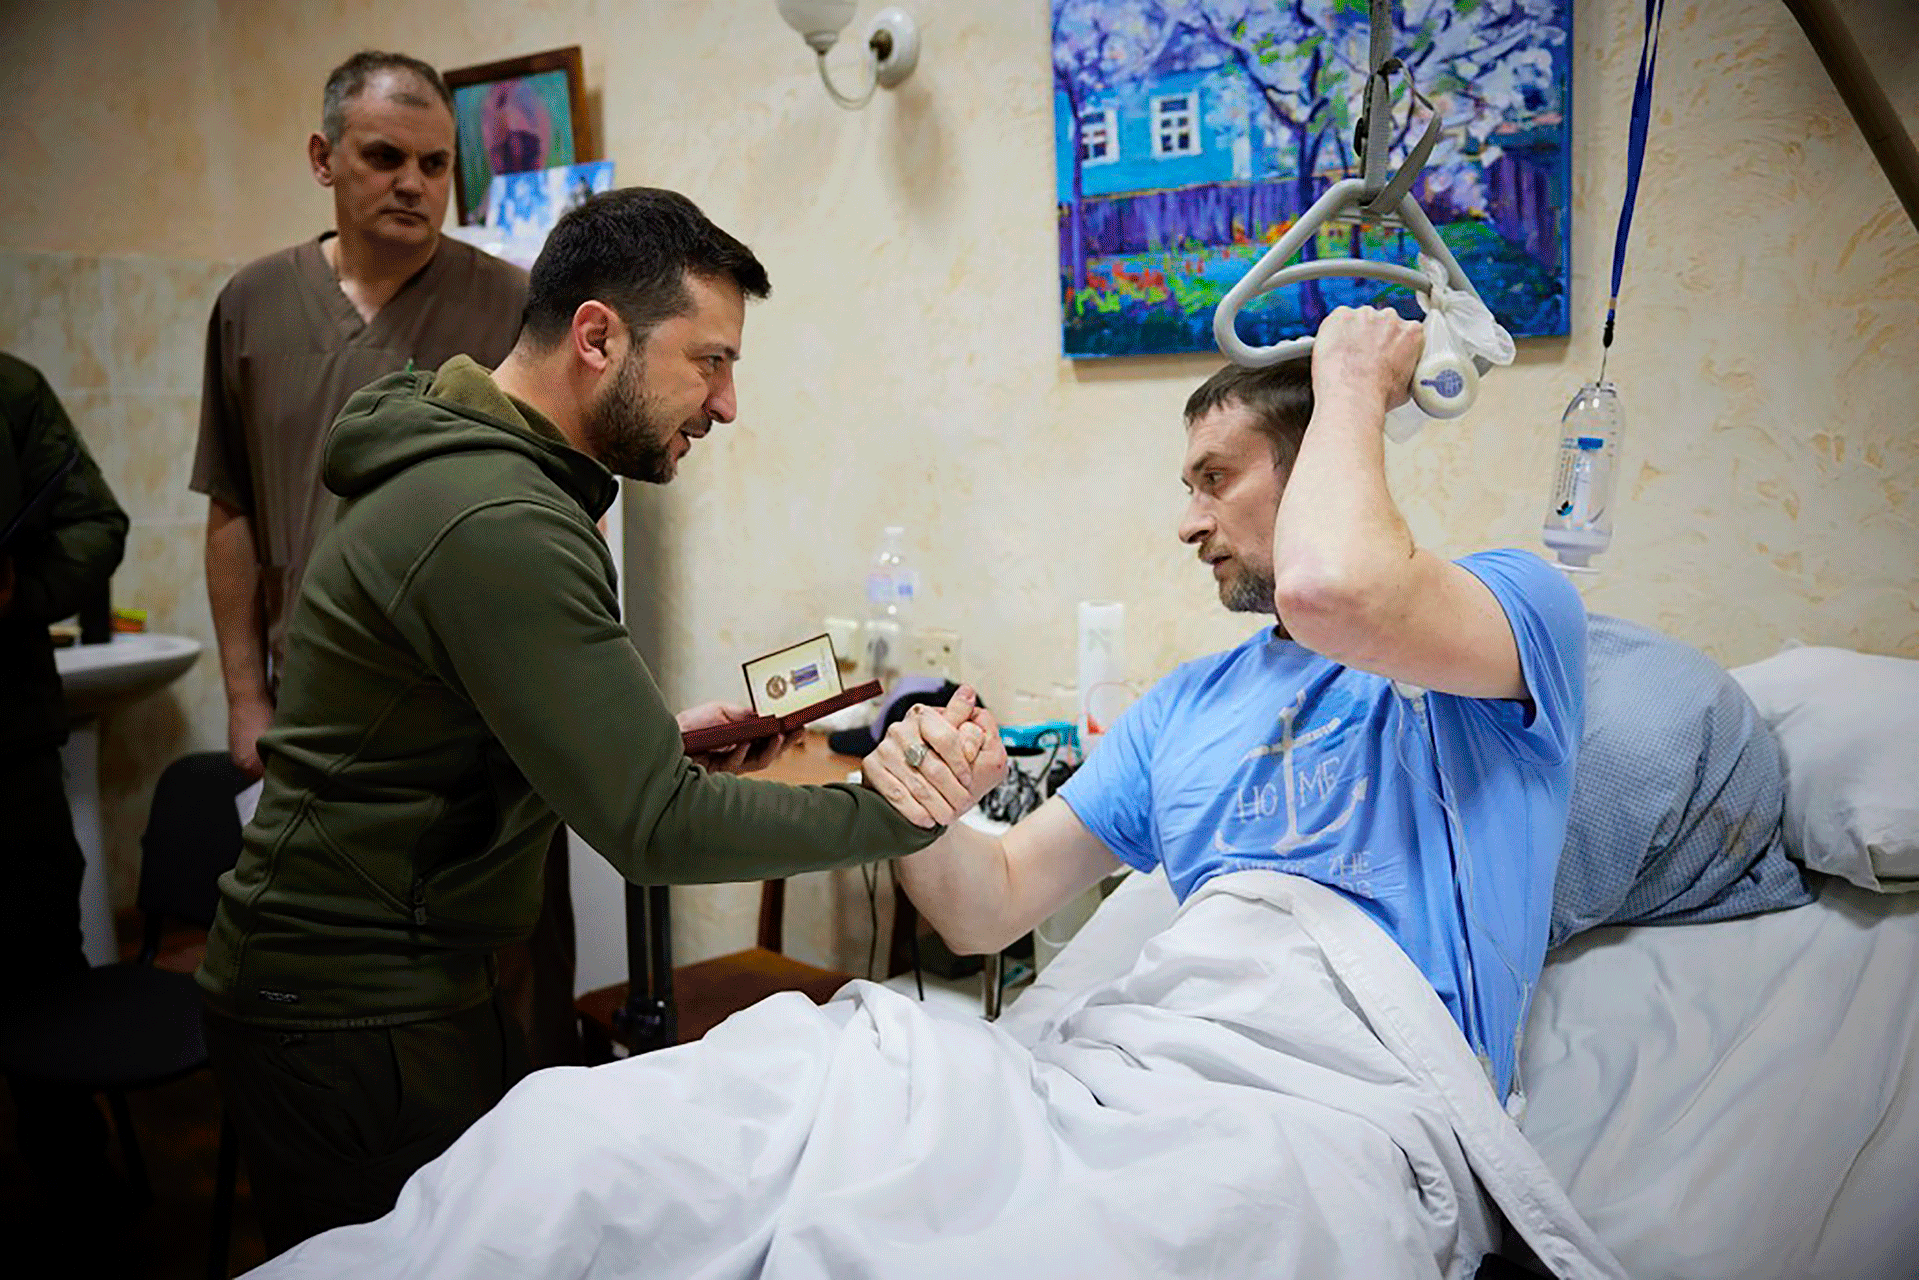 In this photo provided by the press service of the President of Ukraine on Sunday, March 13, 2022, President Volodymyr Zelensky (center) shakes the hand of a wounded soldier during his visit to a hospital in Kyiv, Ukraine.